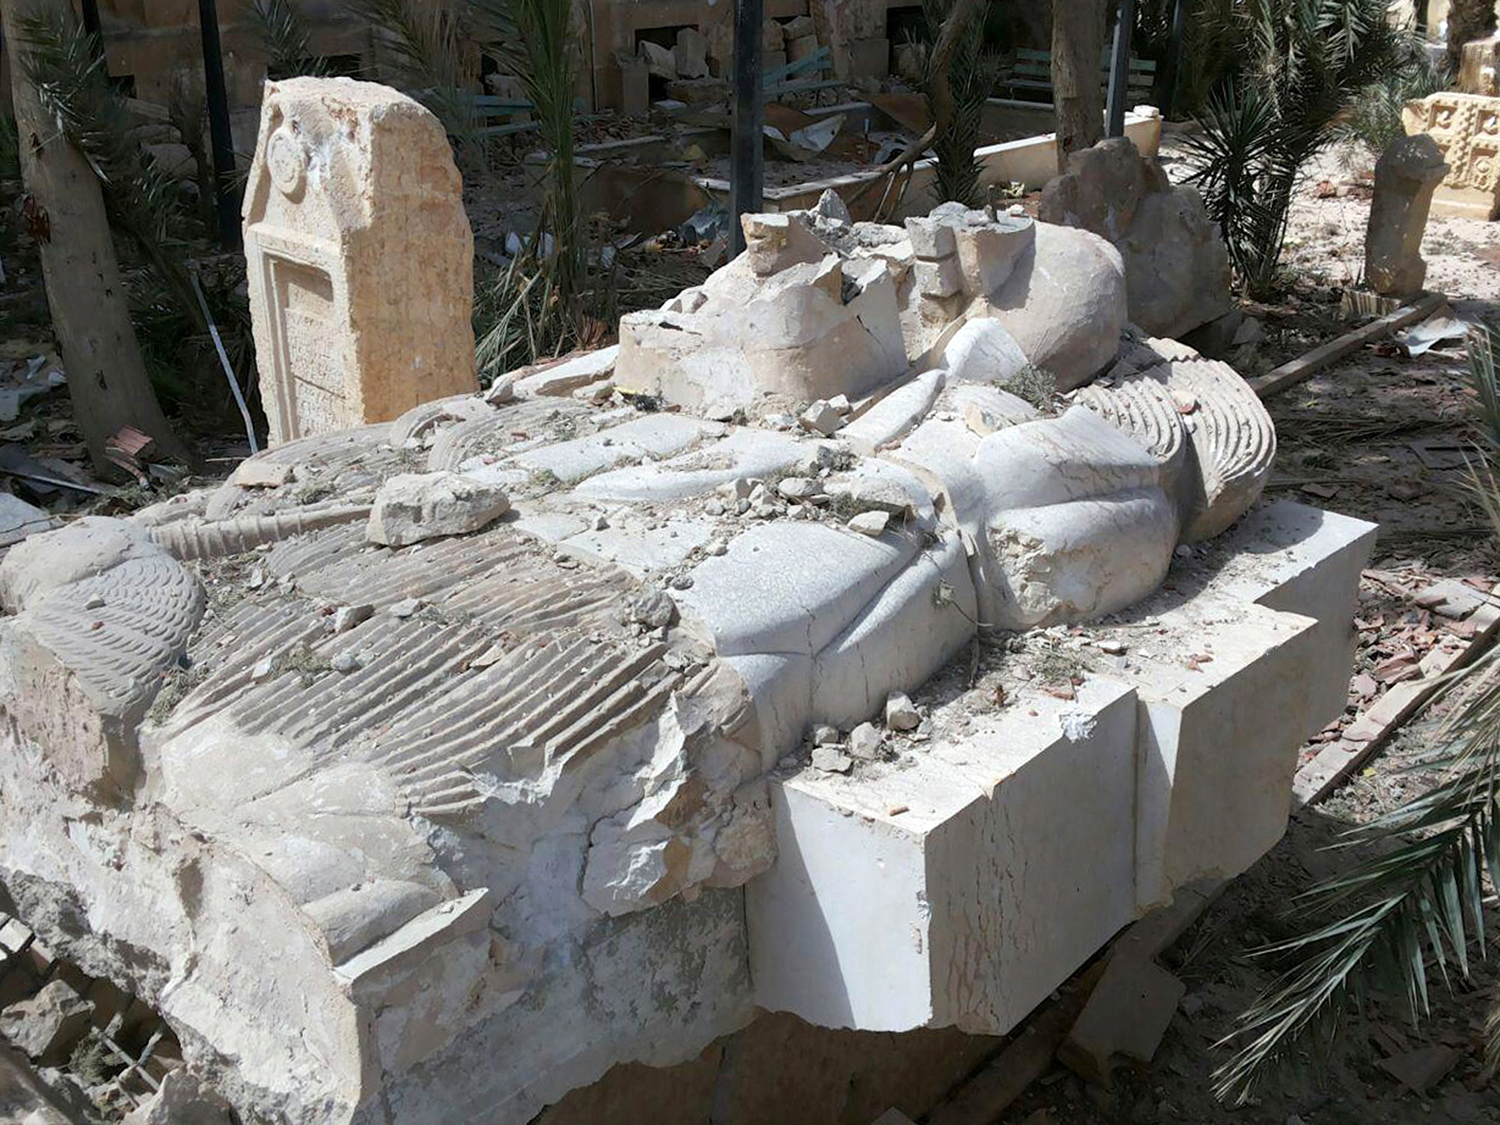 FILE - This file photo released March 27, 2016, by the Syrian official news agency SANA, shows a destroyed statue outside the damaged Palmyra Museum, in Palmyra city, central Syria. Palmyra, the archaeological gem that Islamic State fighters retook Sunday, Dec. 11, 2016, from Syrian troops, is a desert oasis surrounded by palm trees, and a UNESCO world heritage site, that boasts 2,000-year-old towering Roman-era colonnades and priceless artifacts. It is also a strategic crossroads linking the Syrian capital, Damascus, with the country's east and neighboring Iraq. (SANA via AP, File)